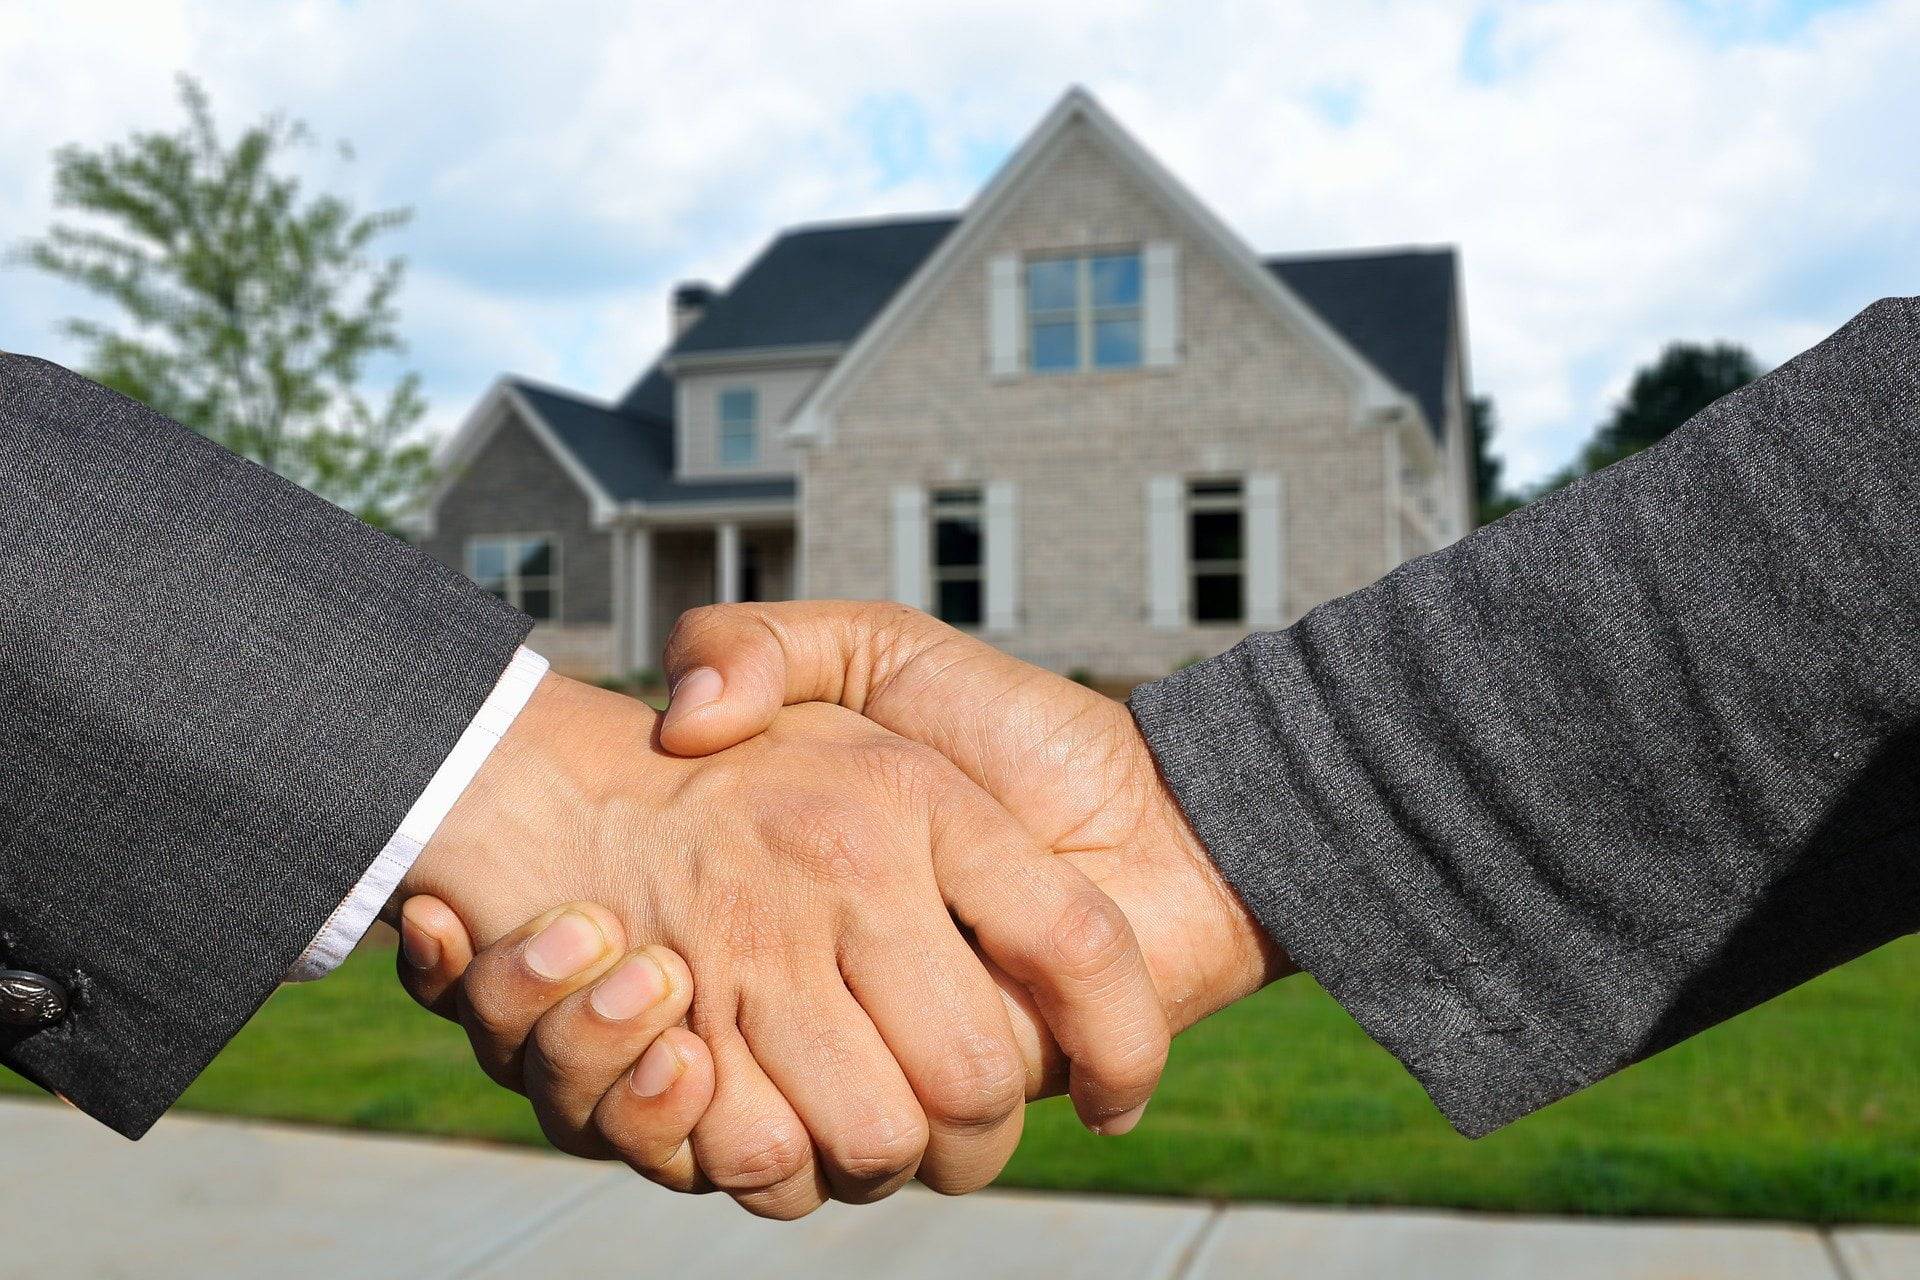 Top Ten Tips for Scoring a Great Real Estate Deal